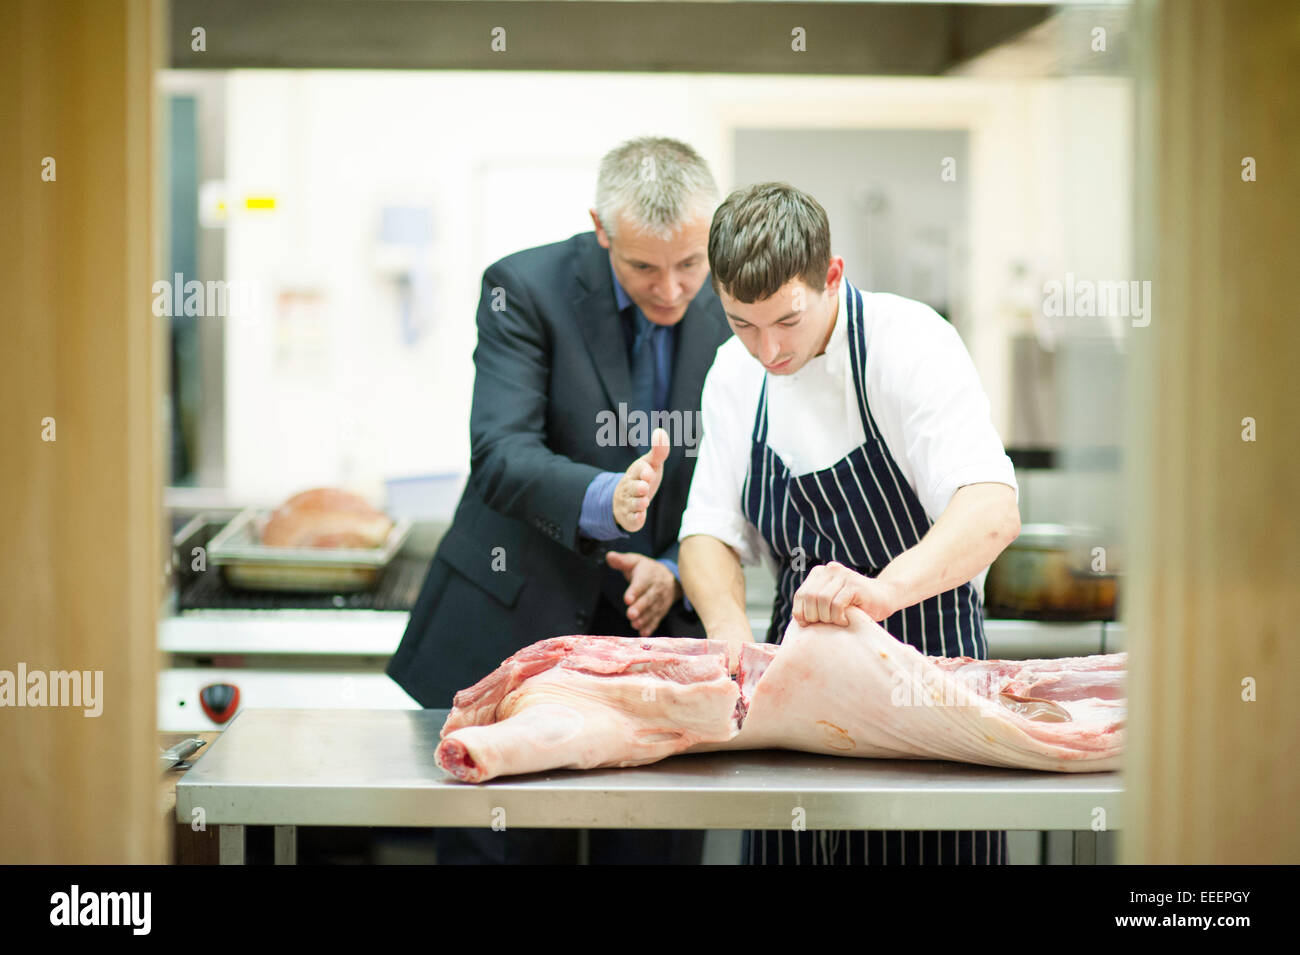 A manager teaching a trainee butcher how to cut meat Stock Photo